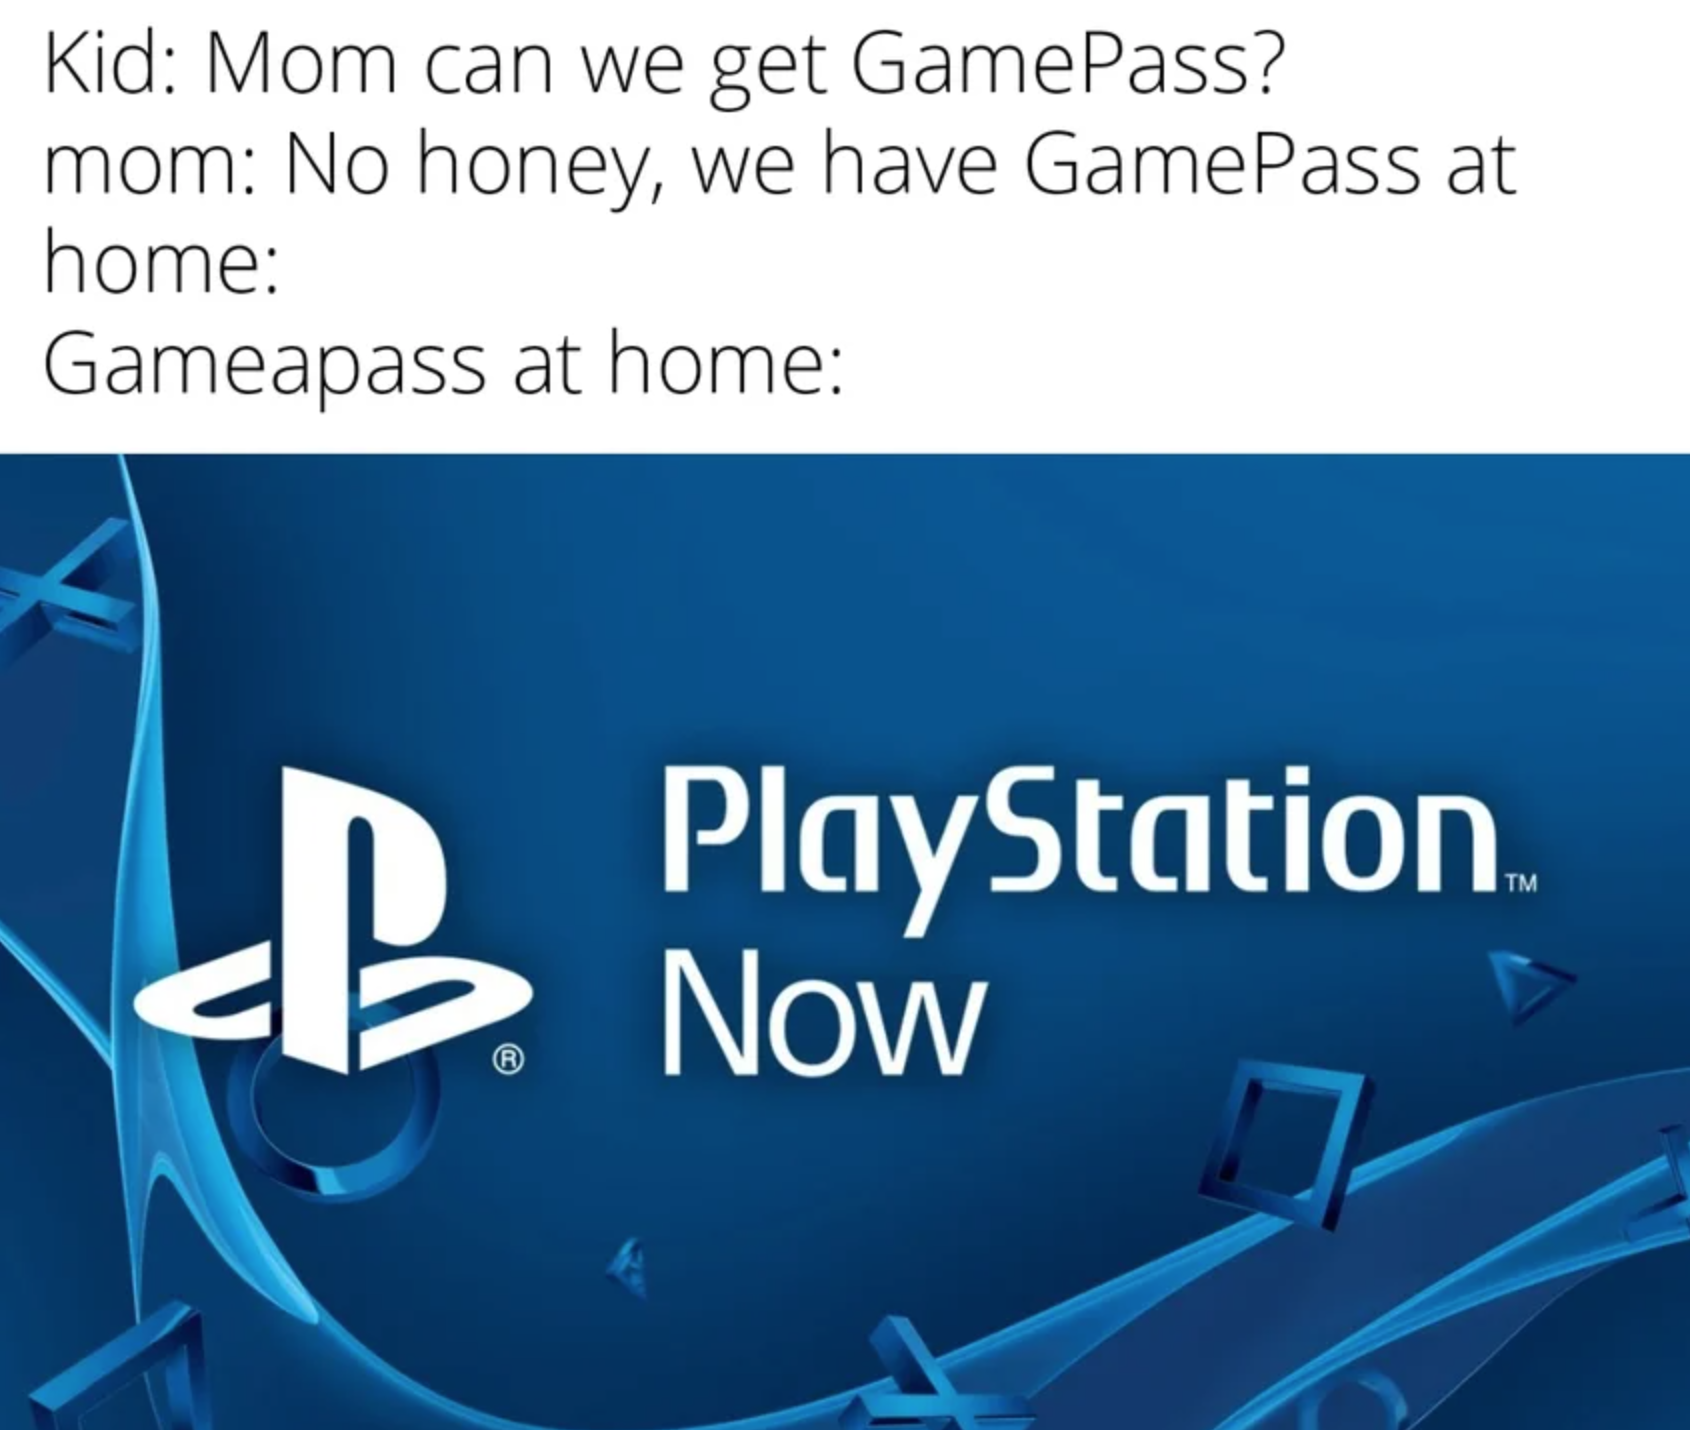 funny gaming memes - city kitchen - Kid Mom can we get GamePass? mom No honey, we have GamePass at home Gameapass at home B PlayStation Now